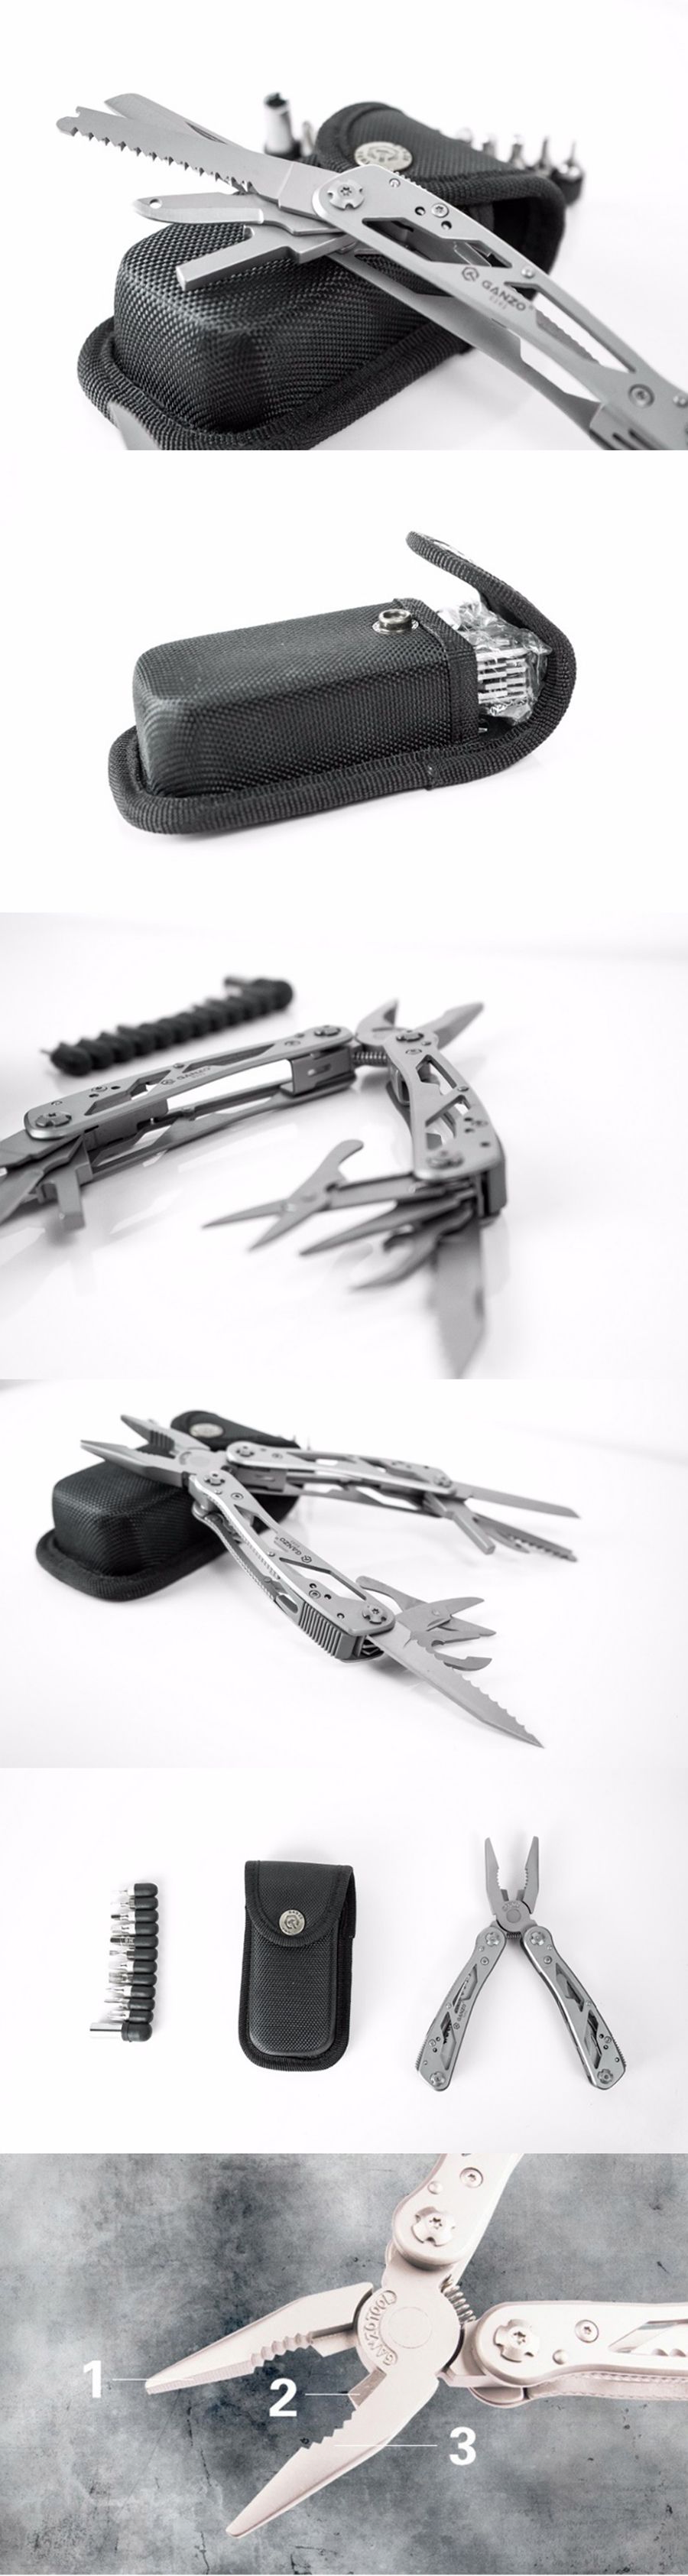 GANZO-G202-24-in-1-EDC-Multitools-Survival-Tool-Kit-Folding-Hand-Knife-Portable-Plier-Clamp-Wire-Str-1732905